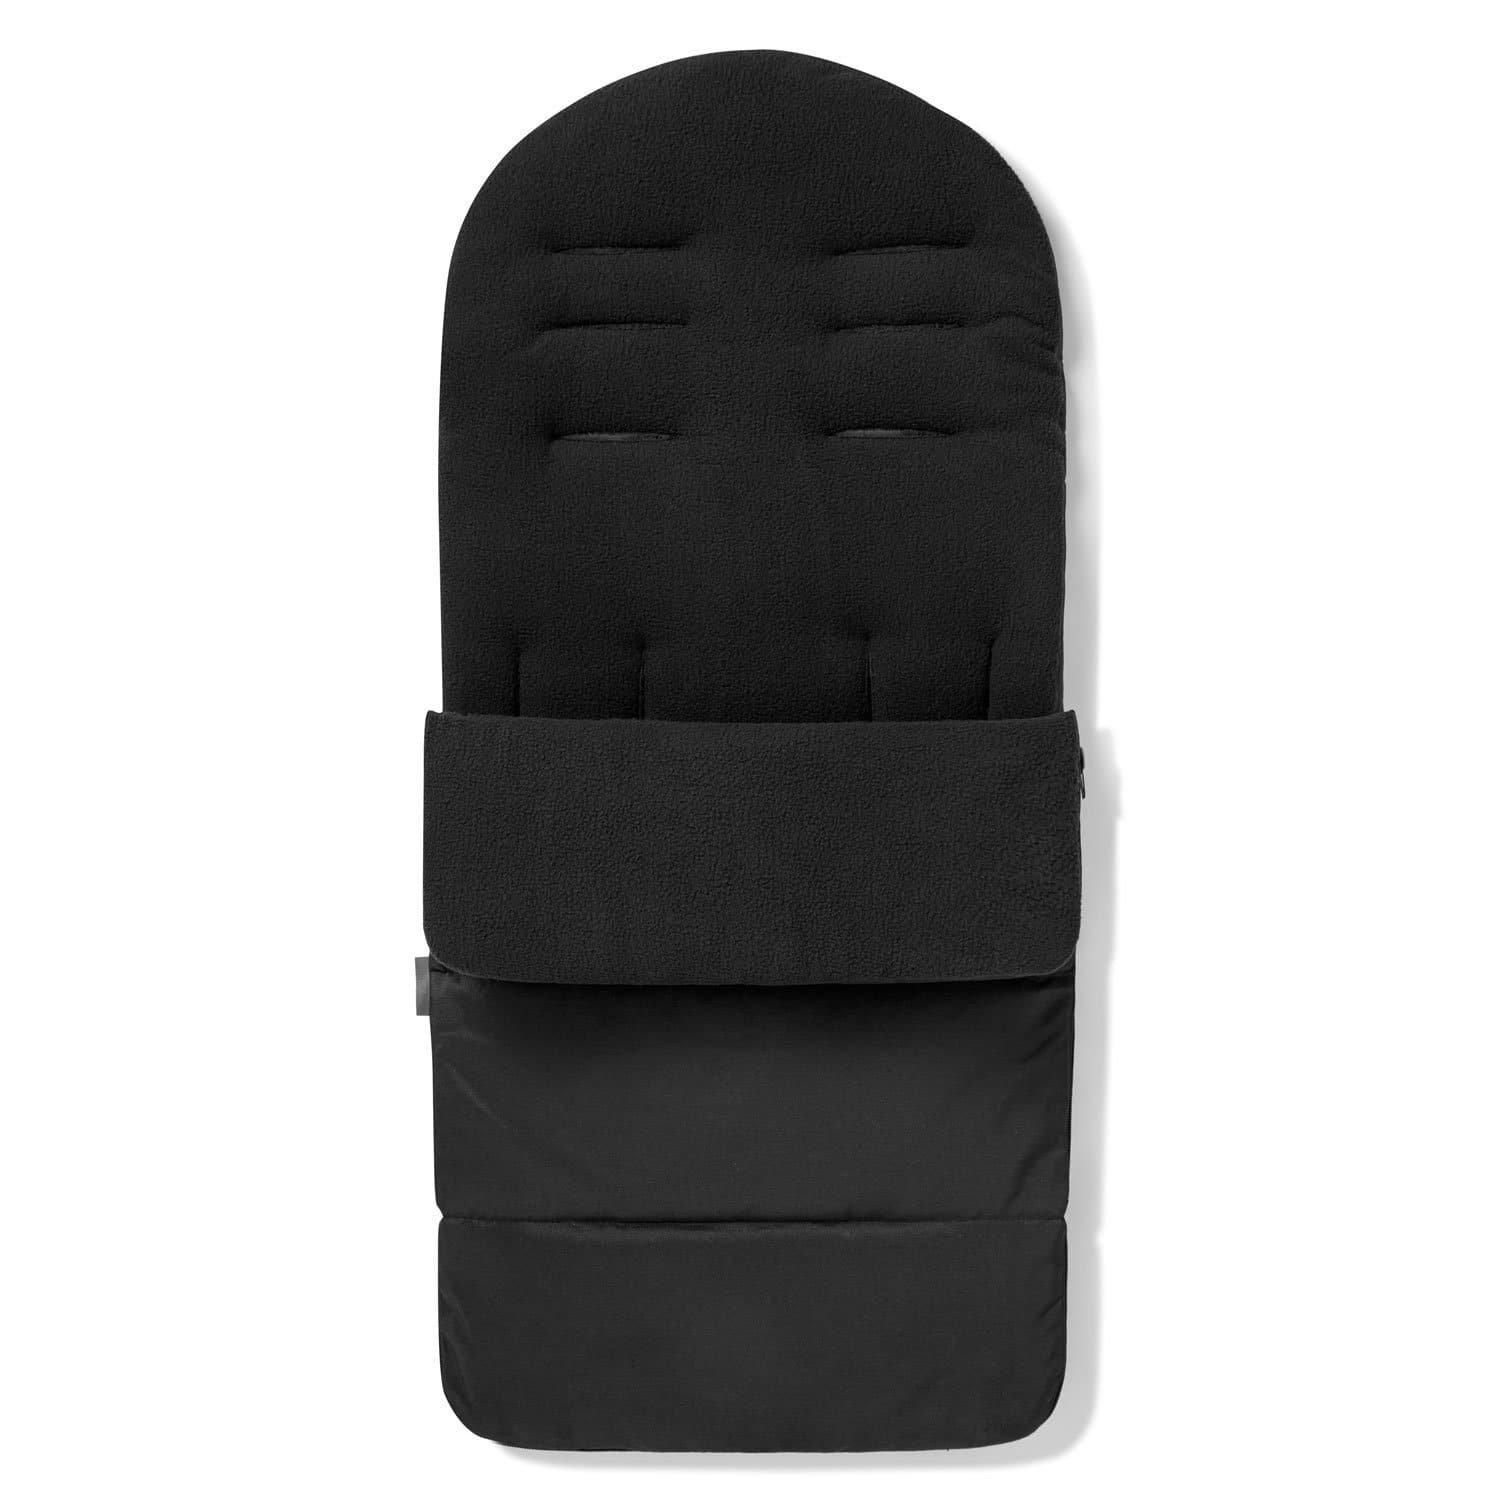 Premium Footmuff / Cosy Toes Compatible with Noukies - Black Jack / Fits All Models | For Your Little One